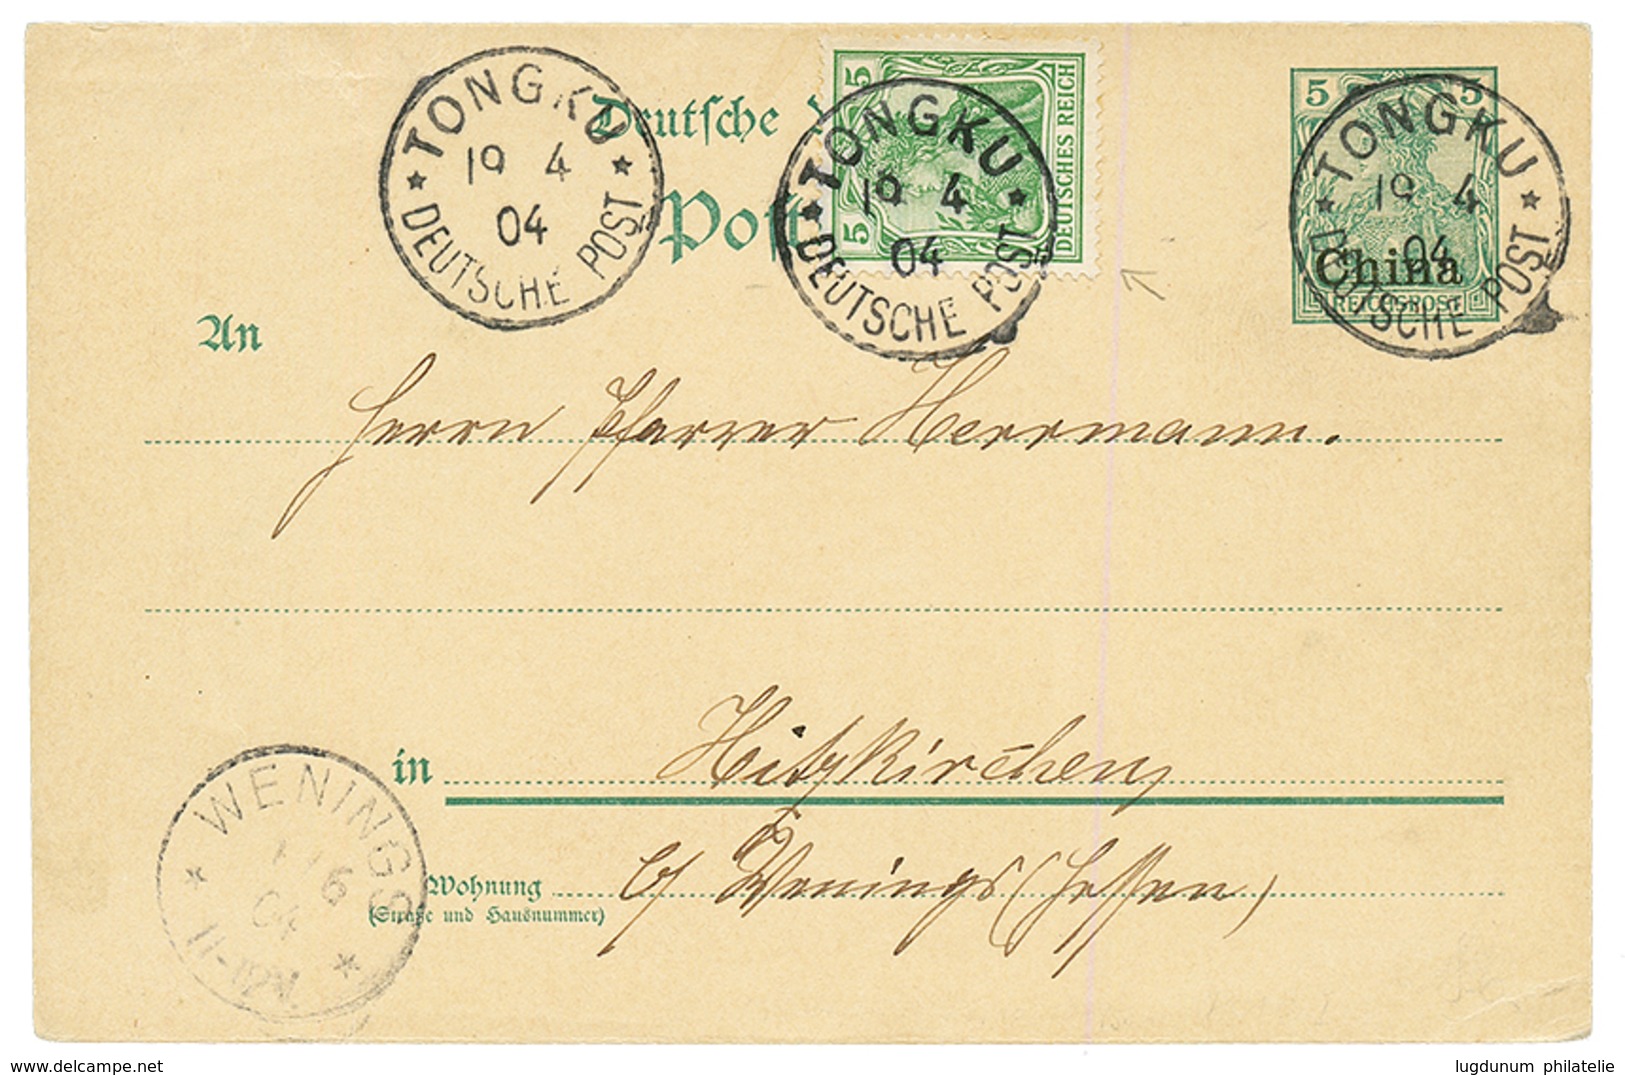 1904 CHINA P./Stat 5c + GERMANY 5pf Canc. TONGKU To GERMANY. Vf Mixed Franking. Superb. - Deutsche Post In China